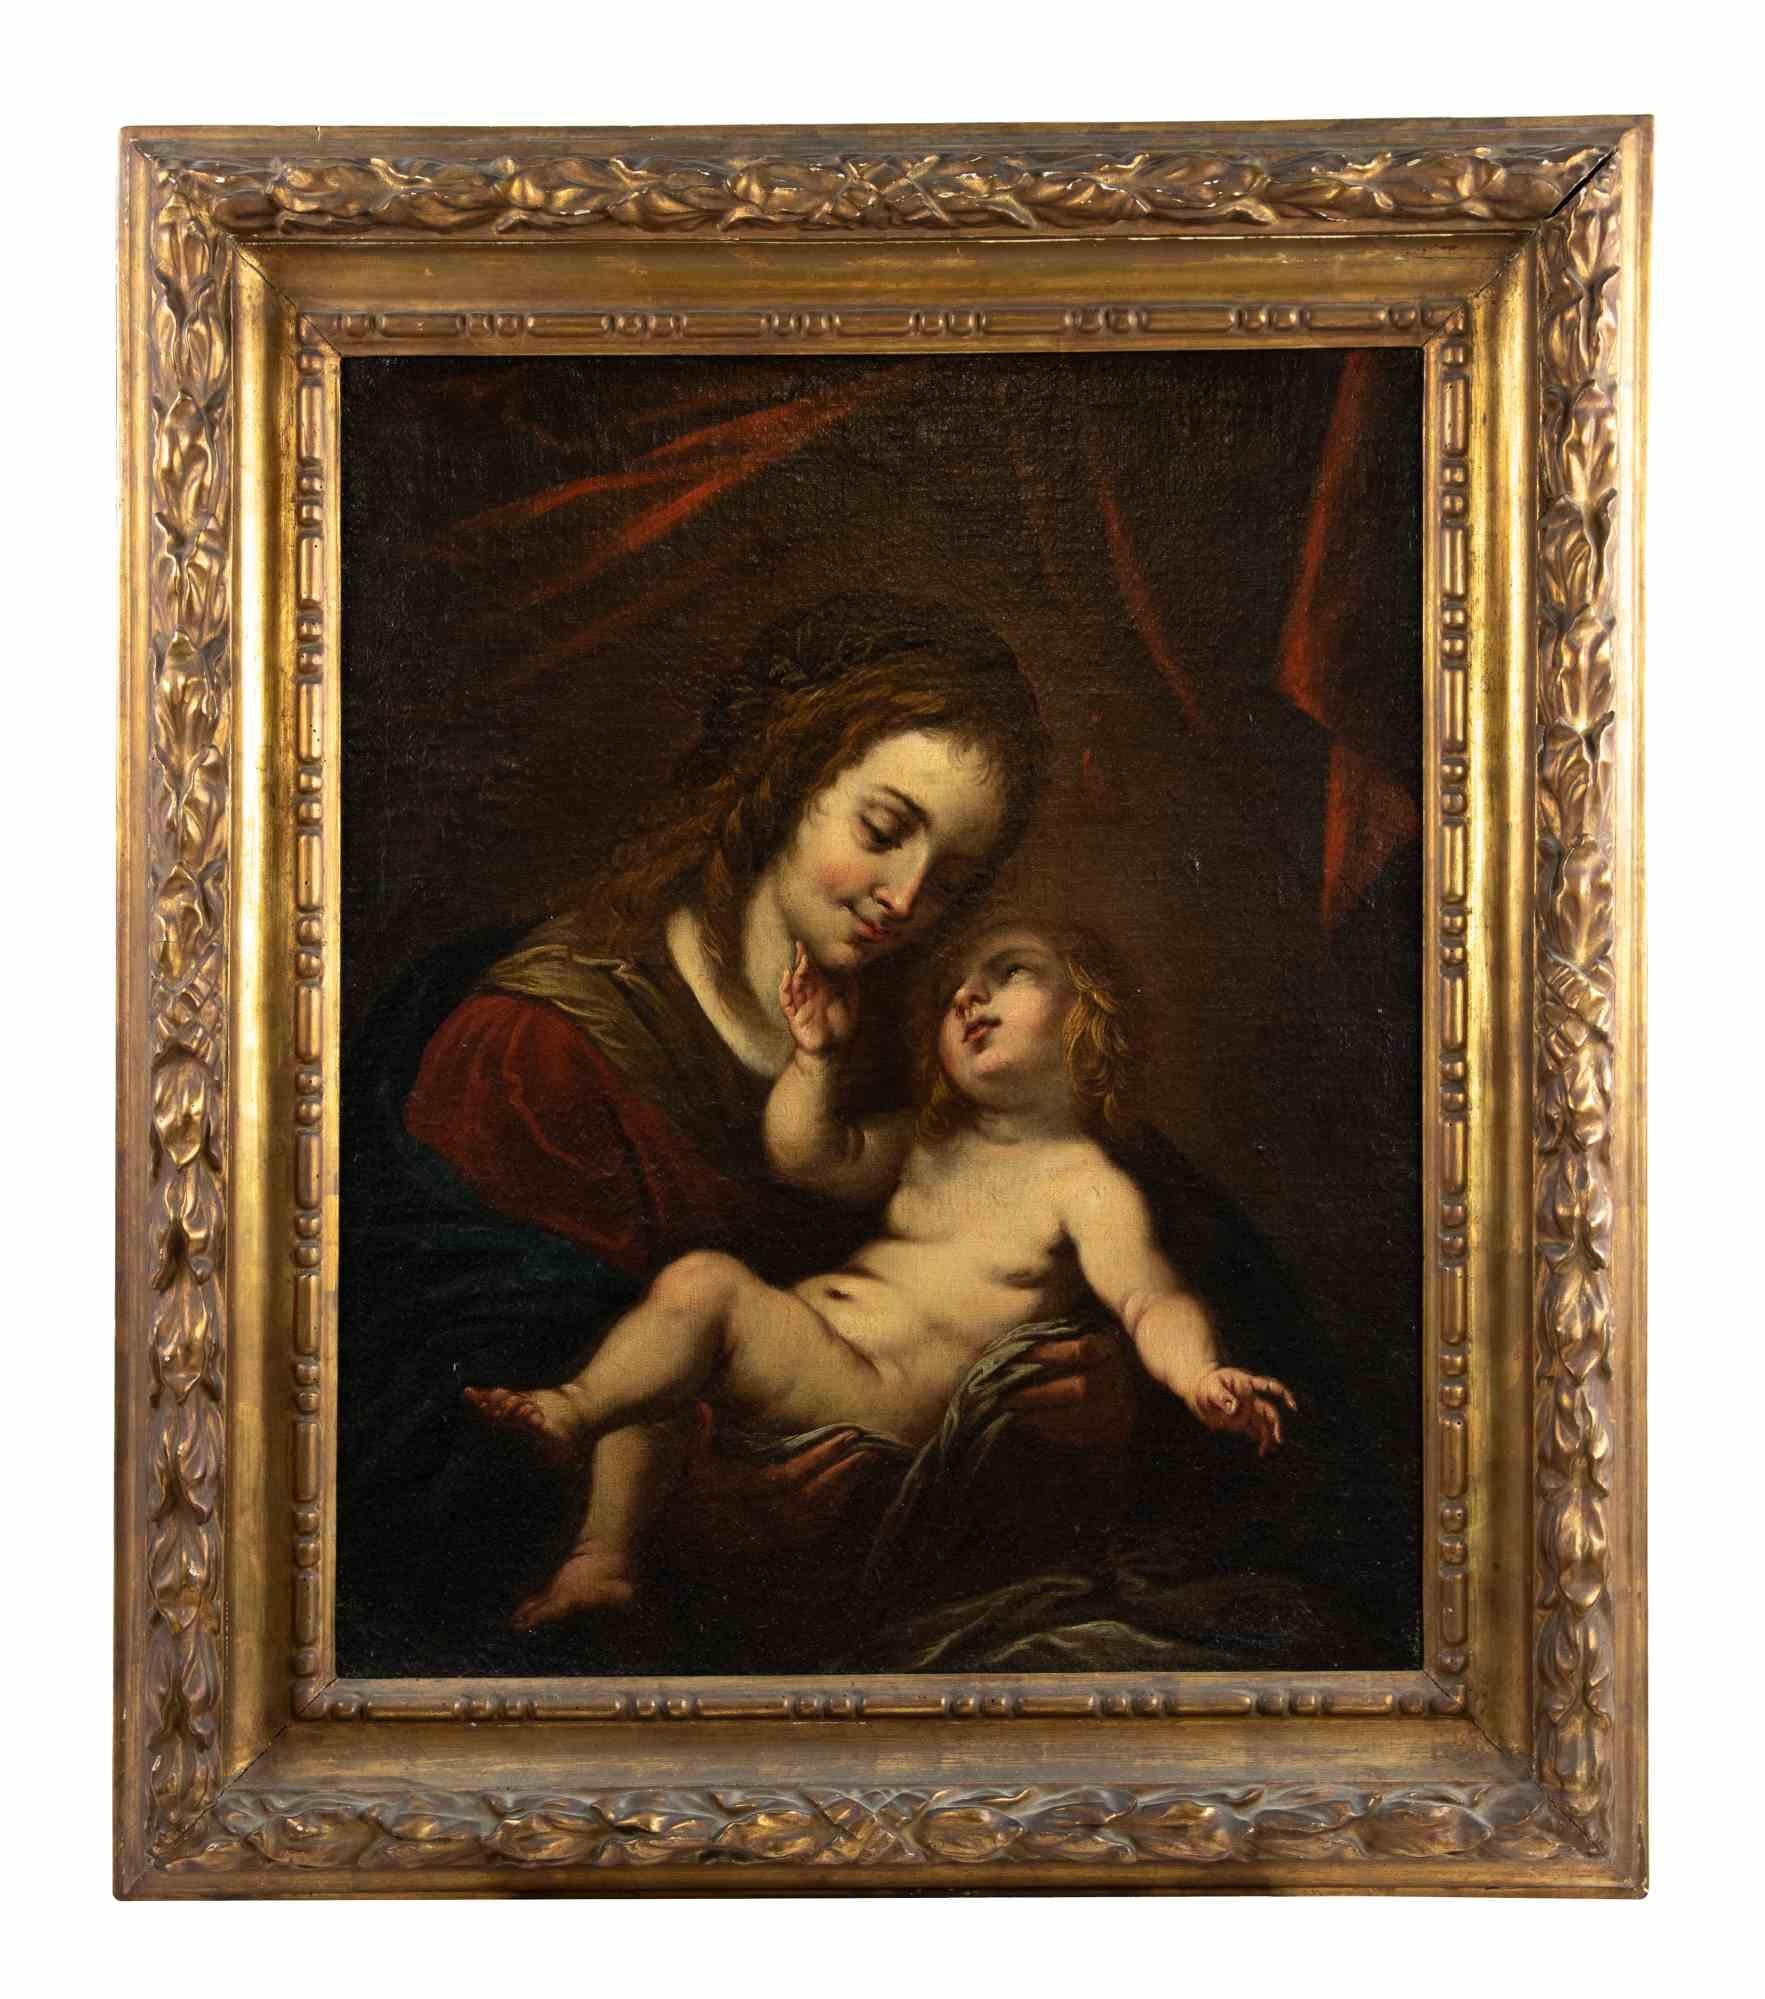 Virgin Mary and Jesus is an original old masters' artwork realized by the Flemish painter Theodor Mathon (1606-1676) in the 17th century.

Mixed colored oil painting on canvas depicting the Virgin Mary and Jesus. Monogram of the artist on the back